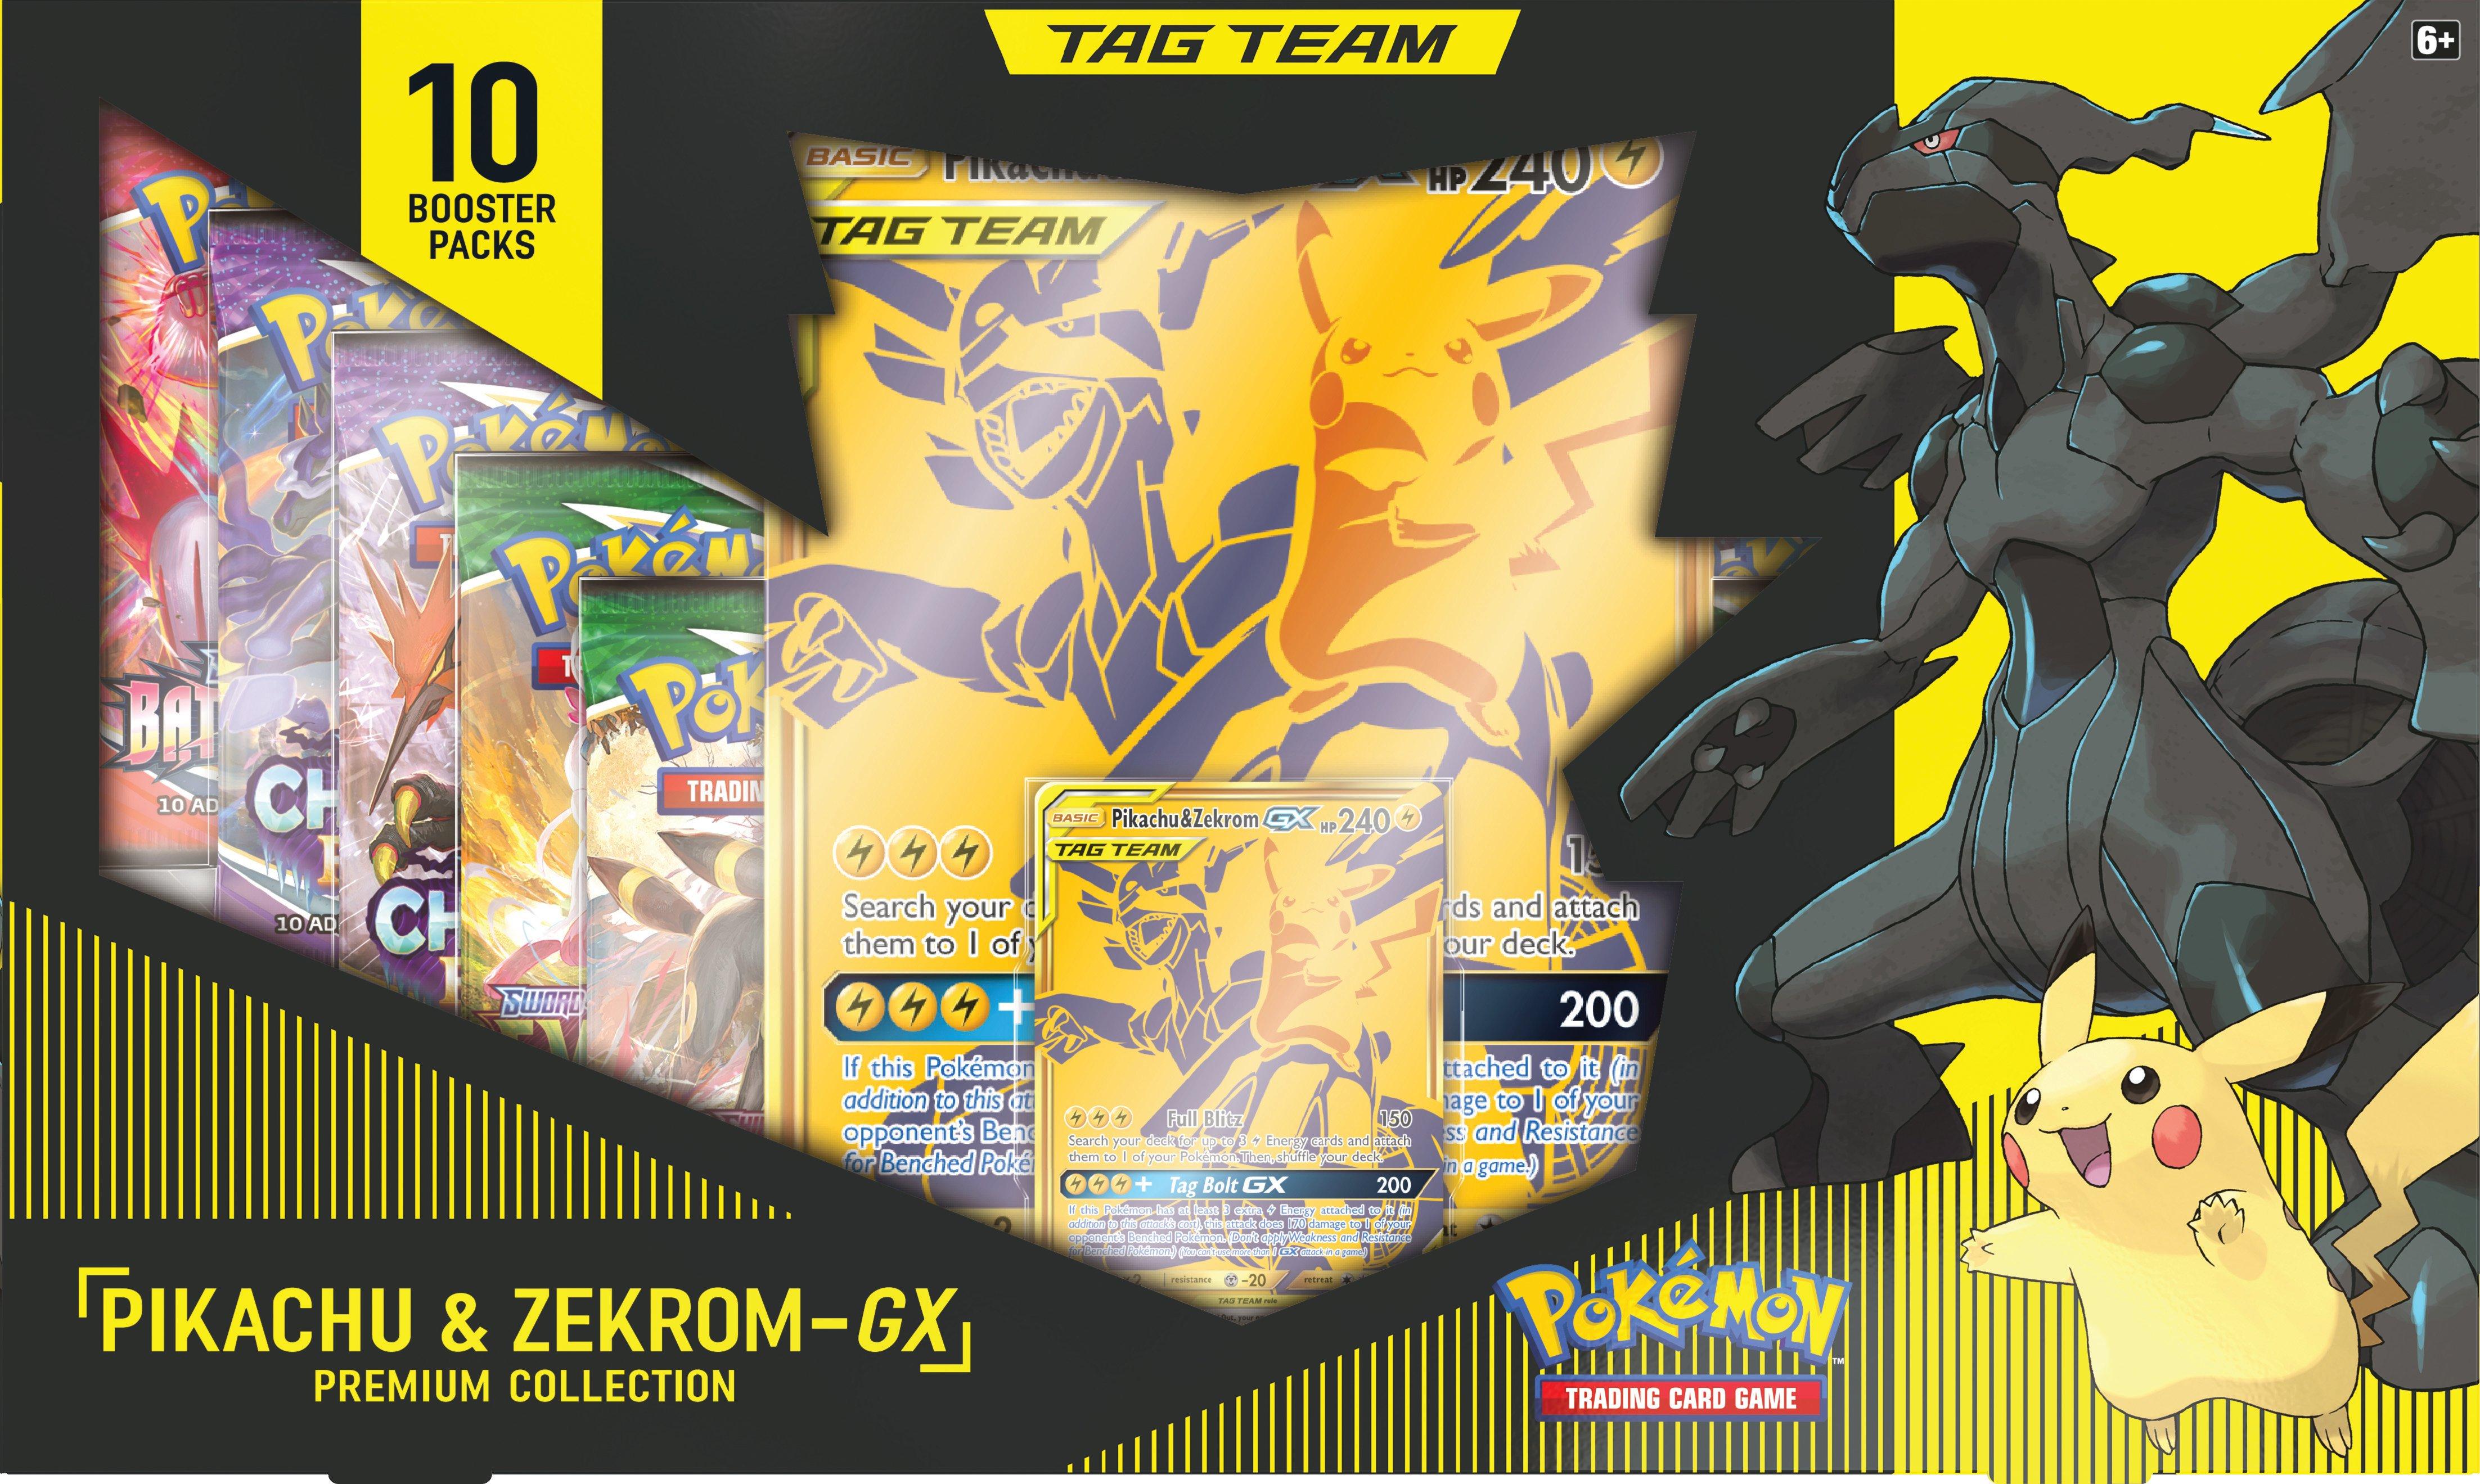 Pokemon Trading Card Game Pikachu And Zekrom Gx Premium Collection Gamestop Exclusive